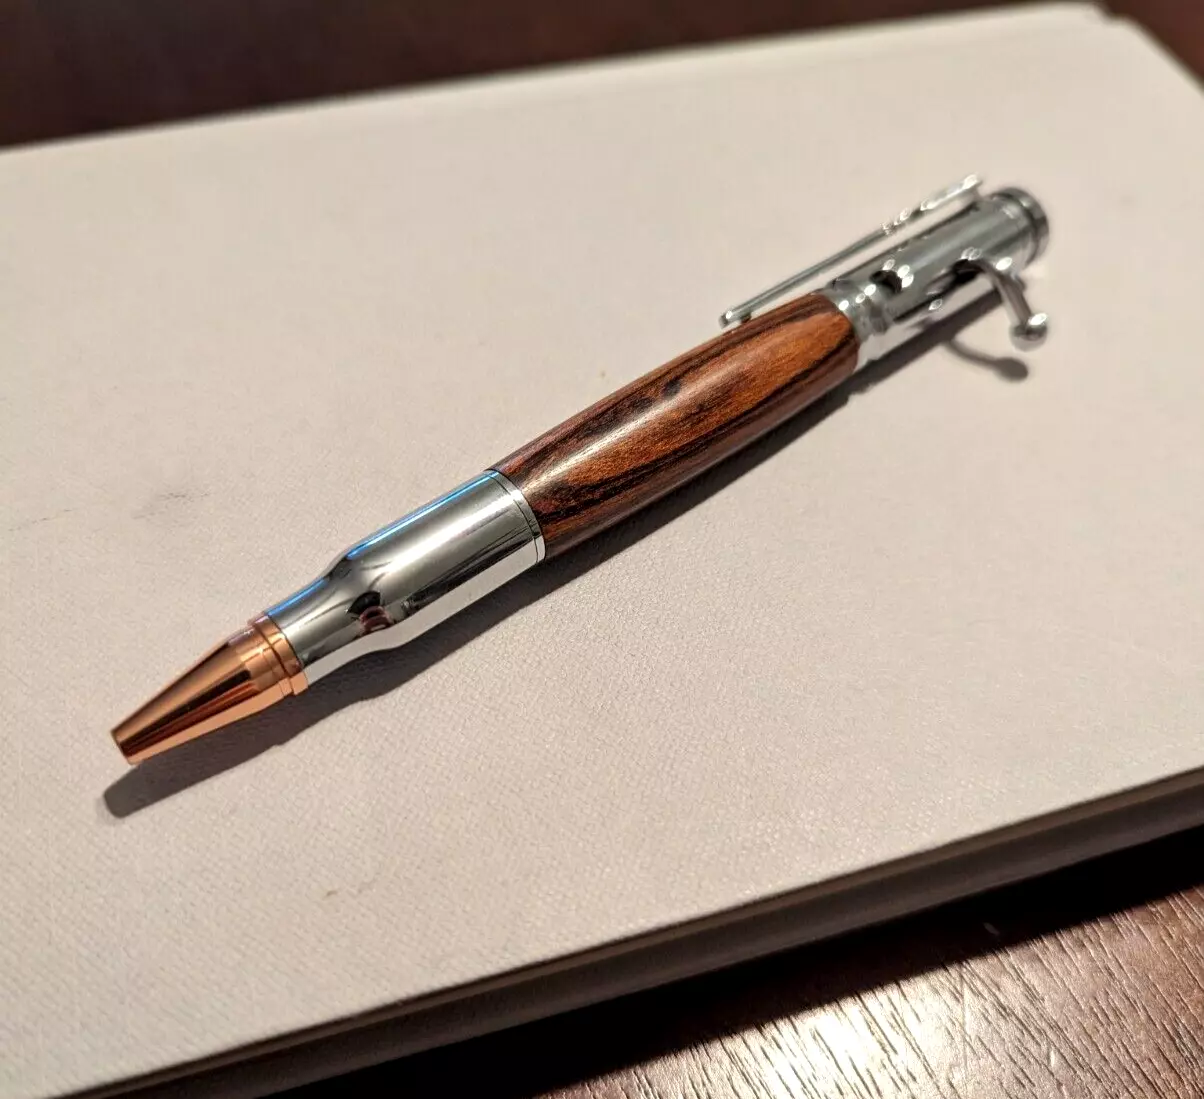 Bolt Action Pen Bullet Pen Metal Wood Material Great Gift For Dad Friend - £10.27 GBP